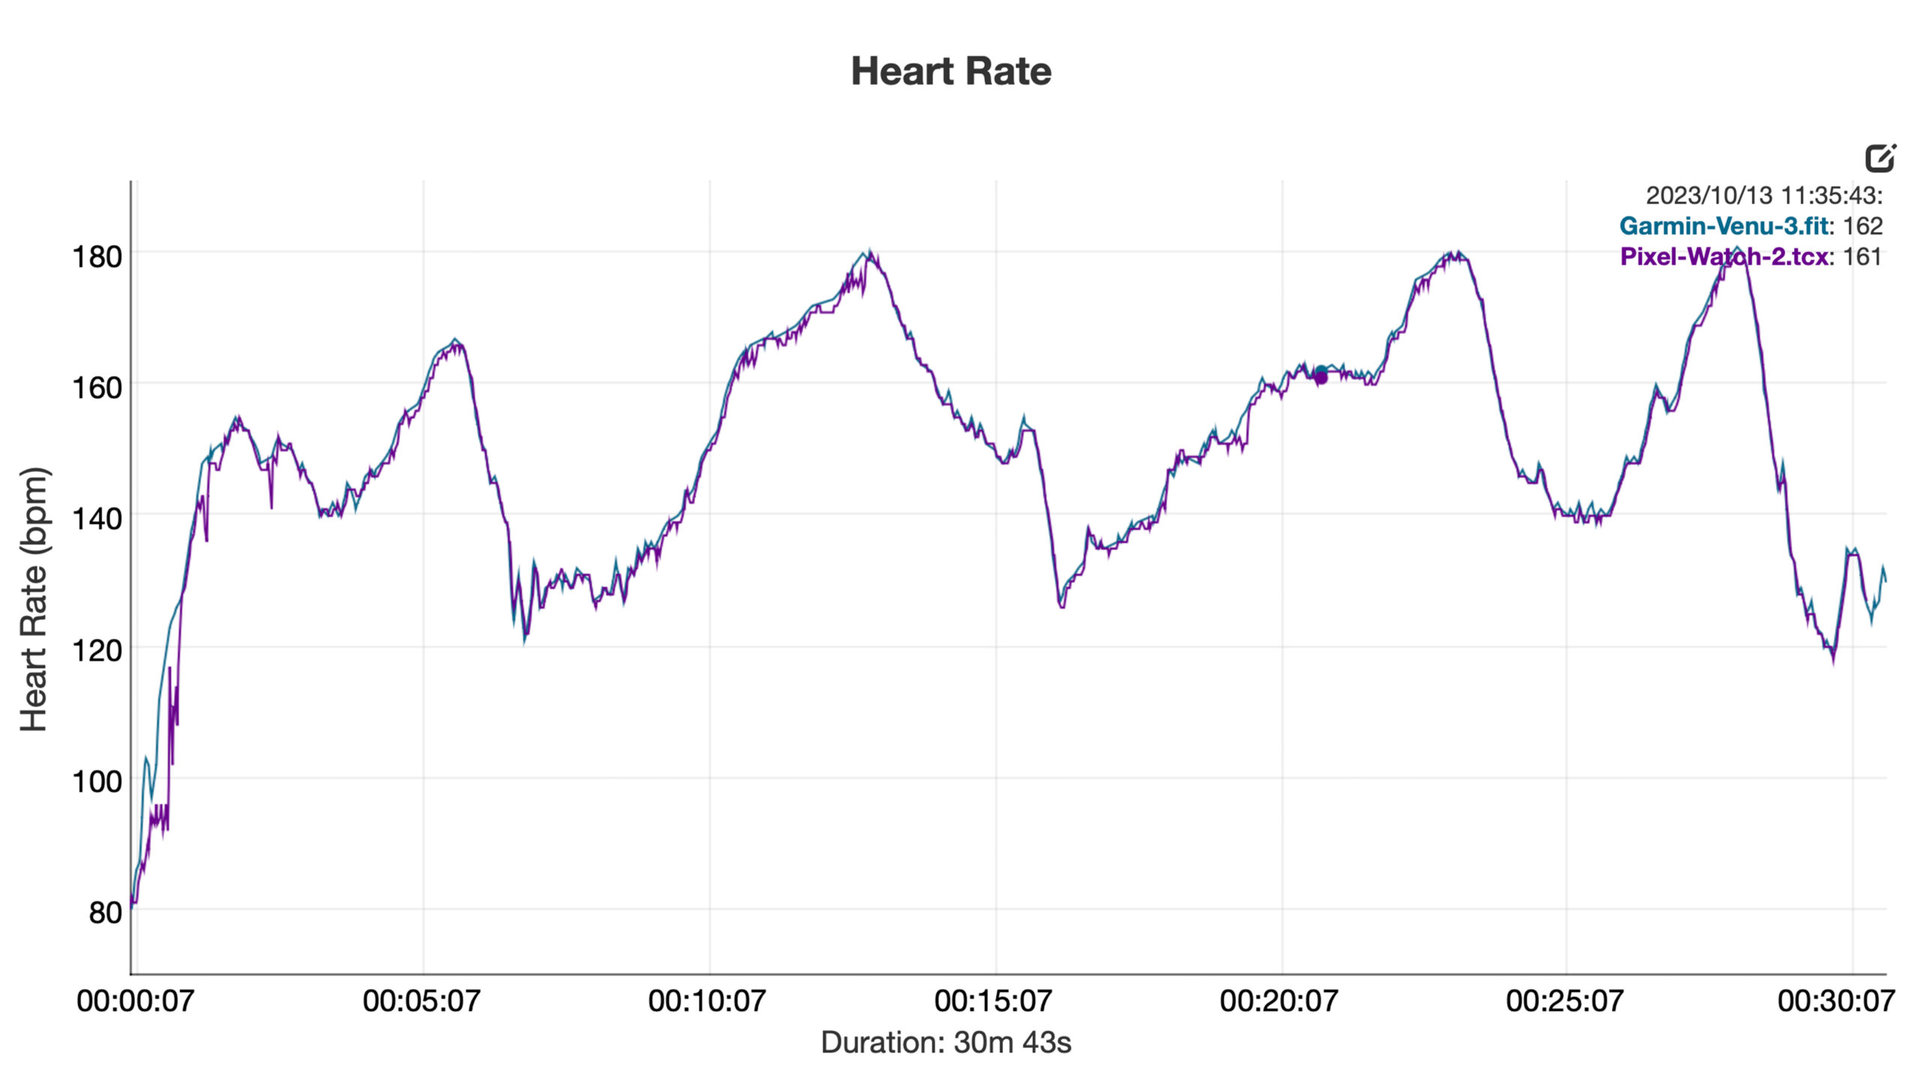 A heart rate graph displays correlation between the Google Pixel Watch 2 and Polar H10 chest strap.